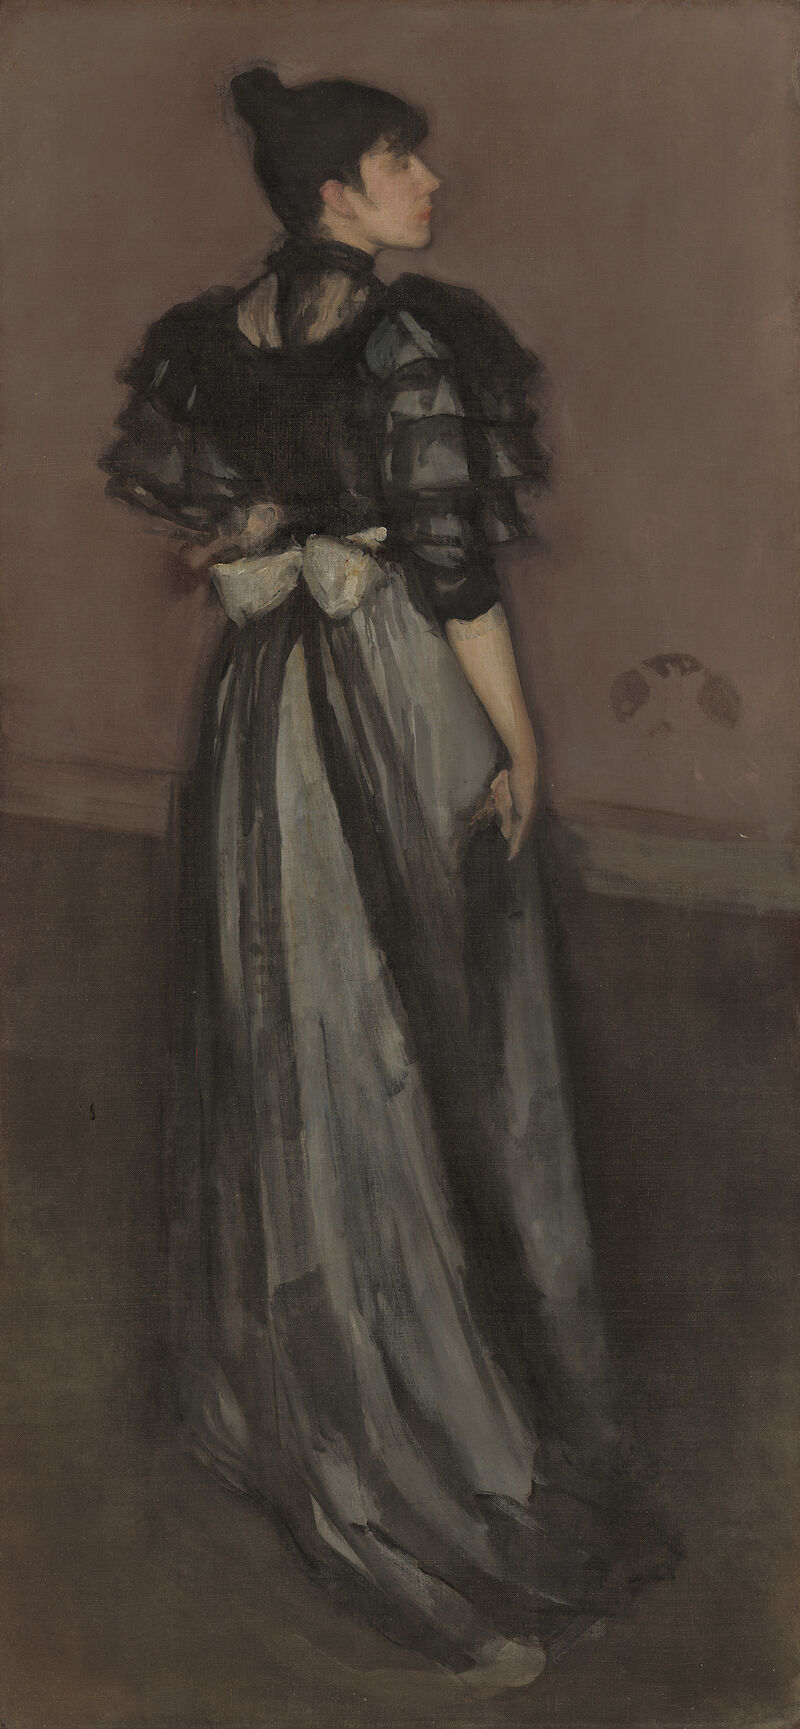 Mother of Pearl and Silver: The Andalusian, James McNeill Whistler